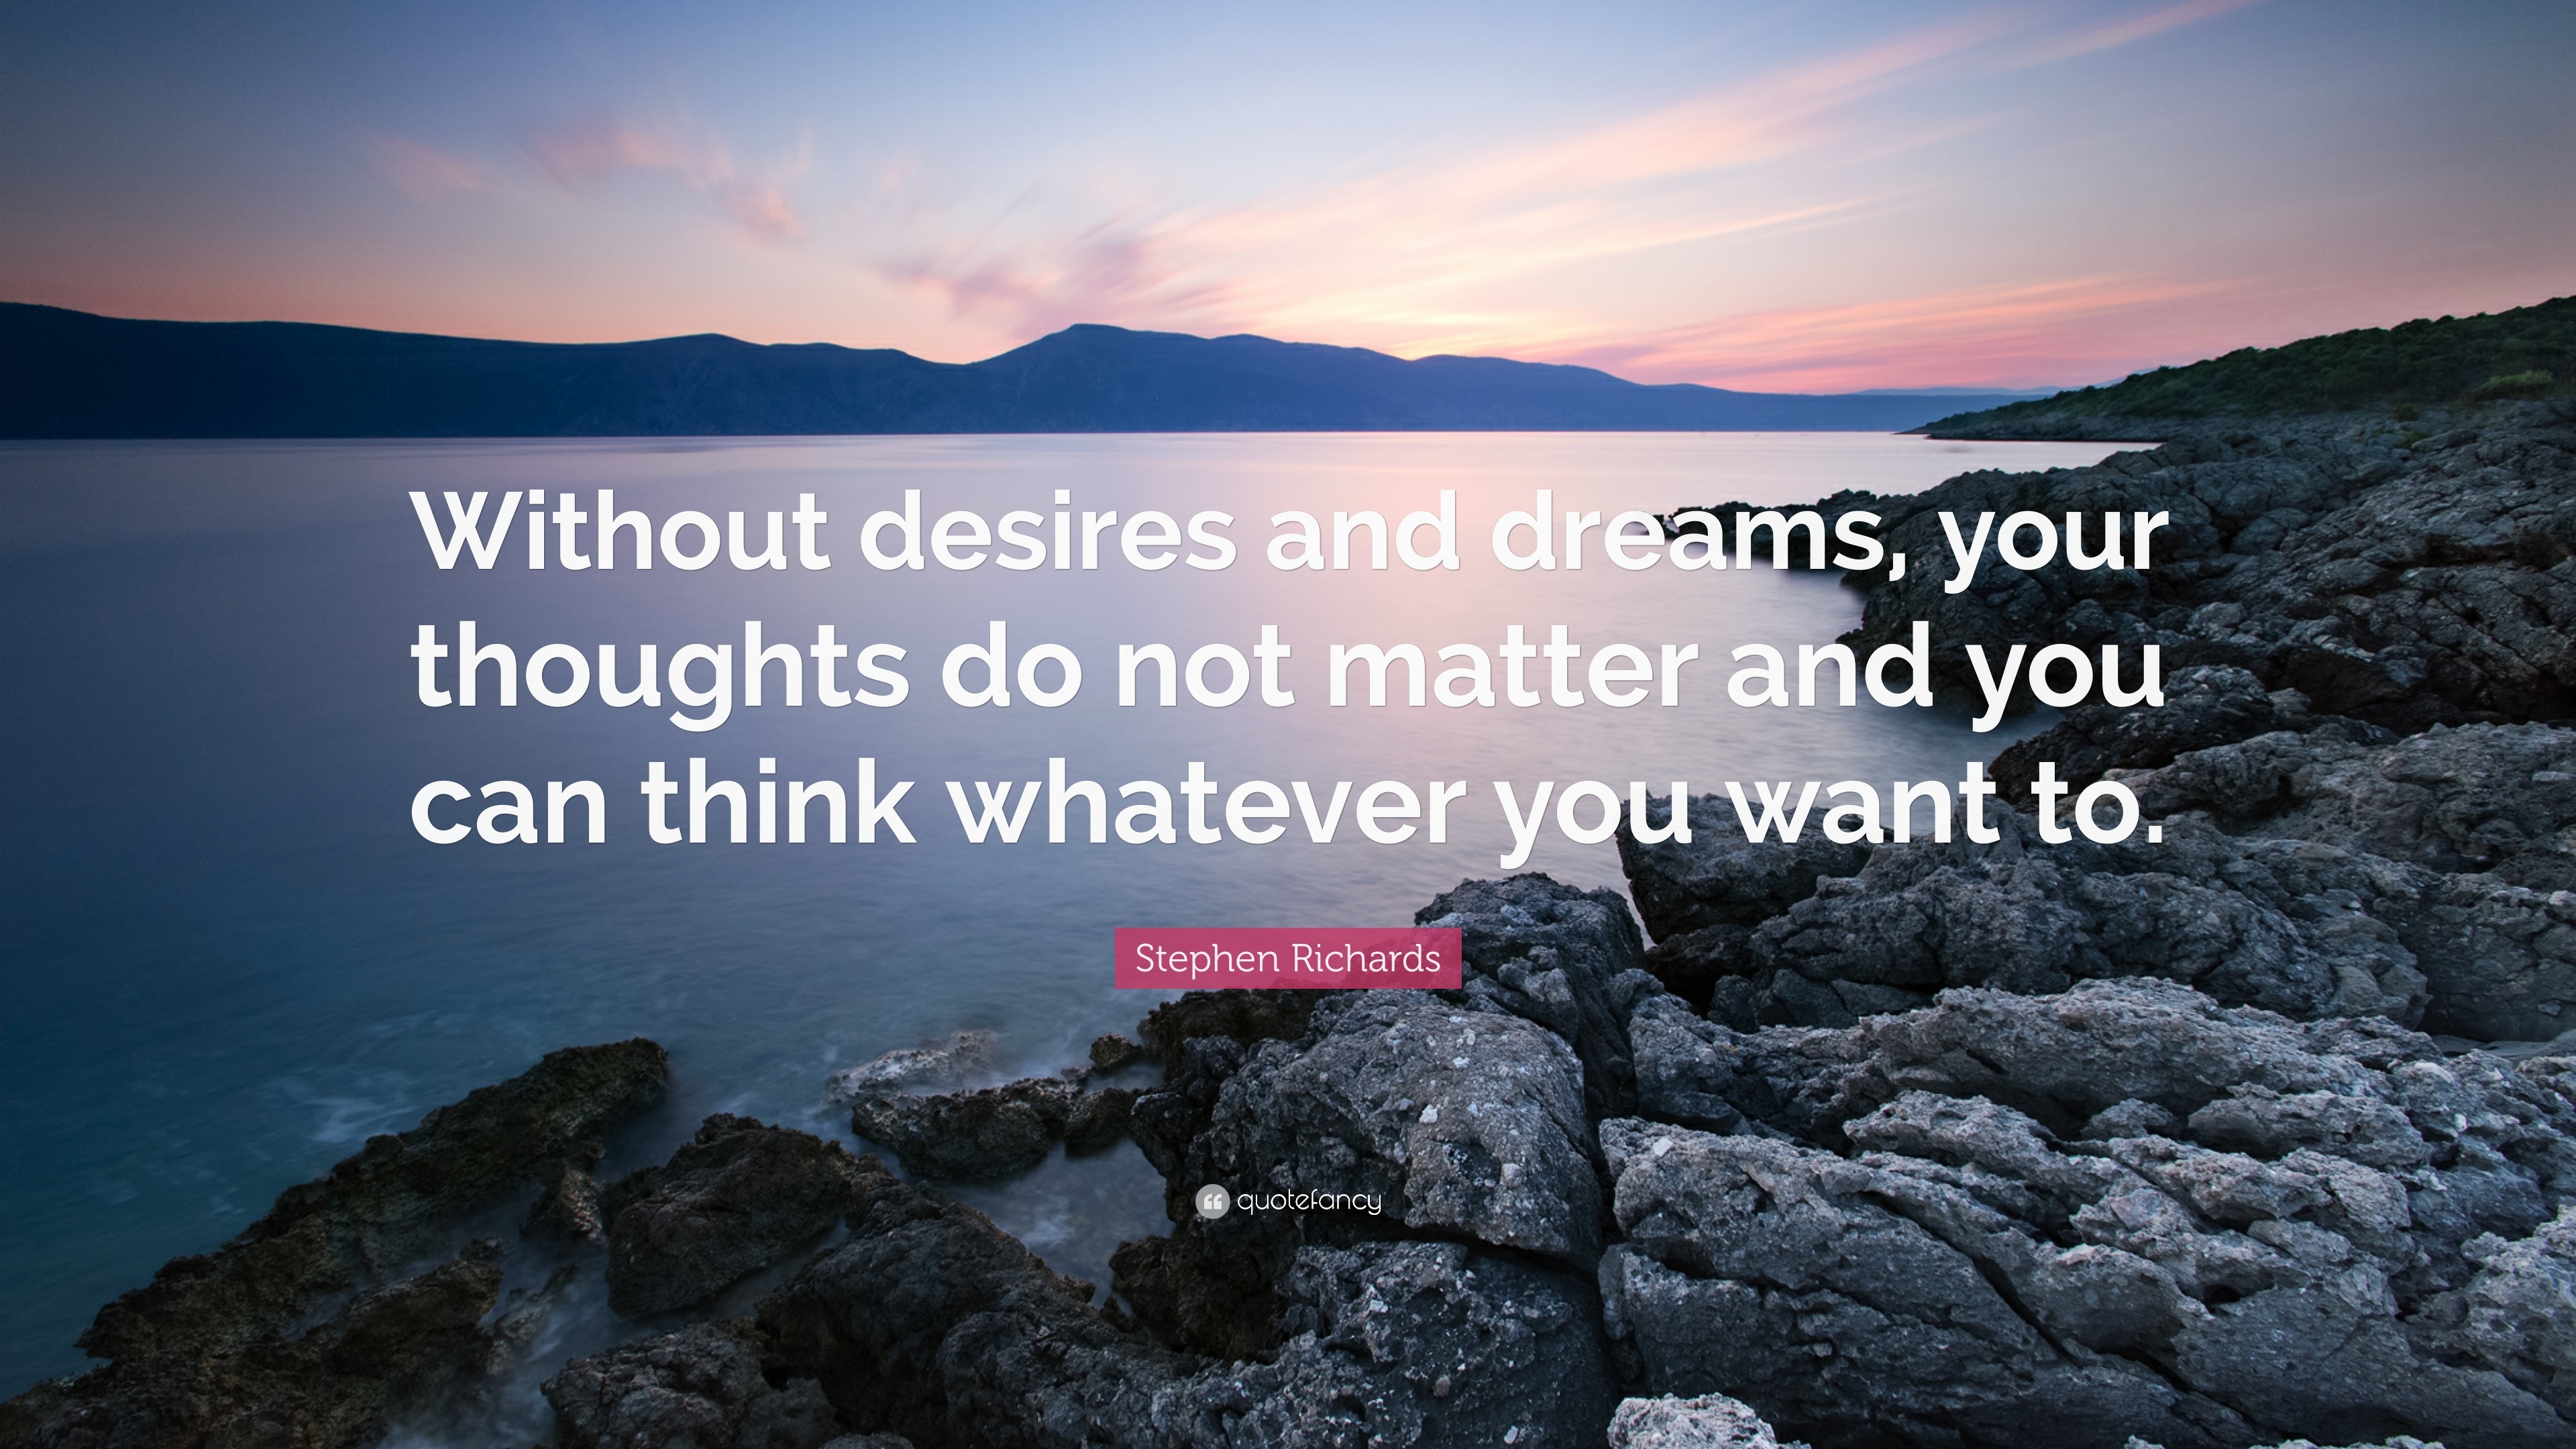 Are dreams your thoughts?